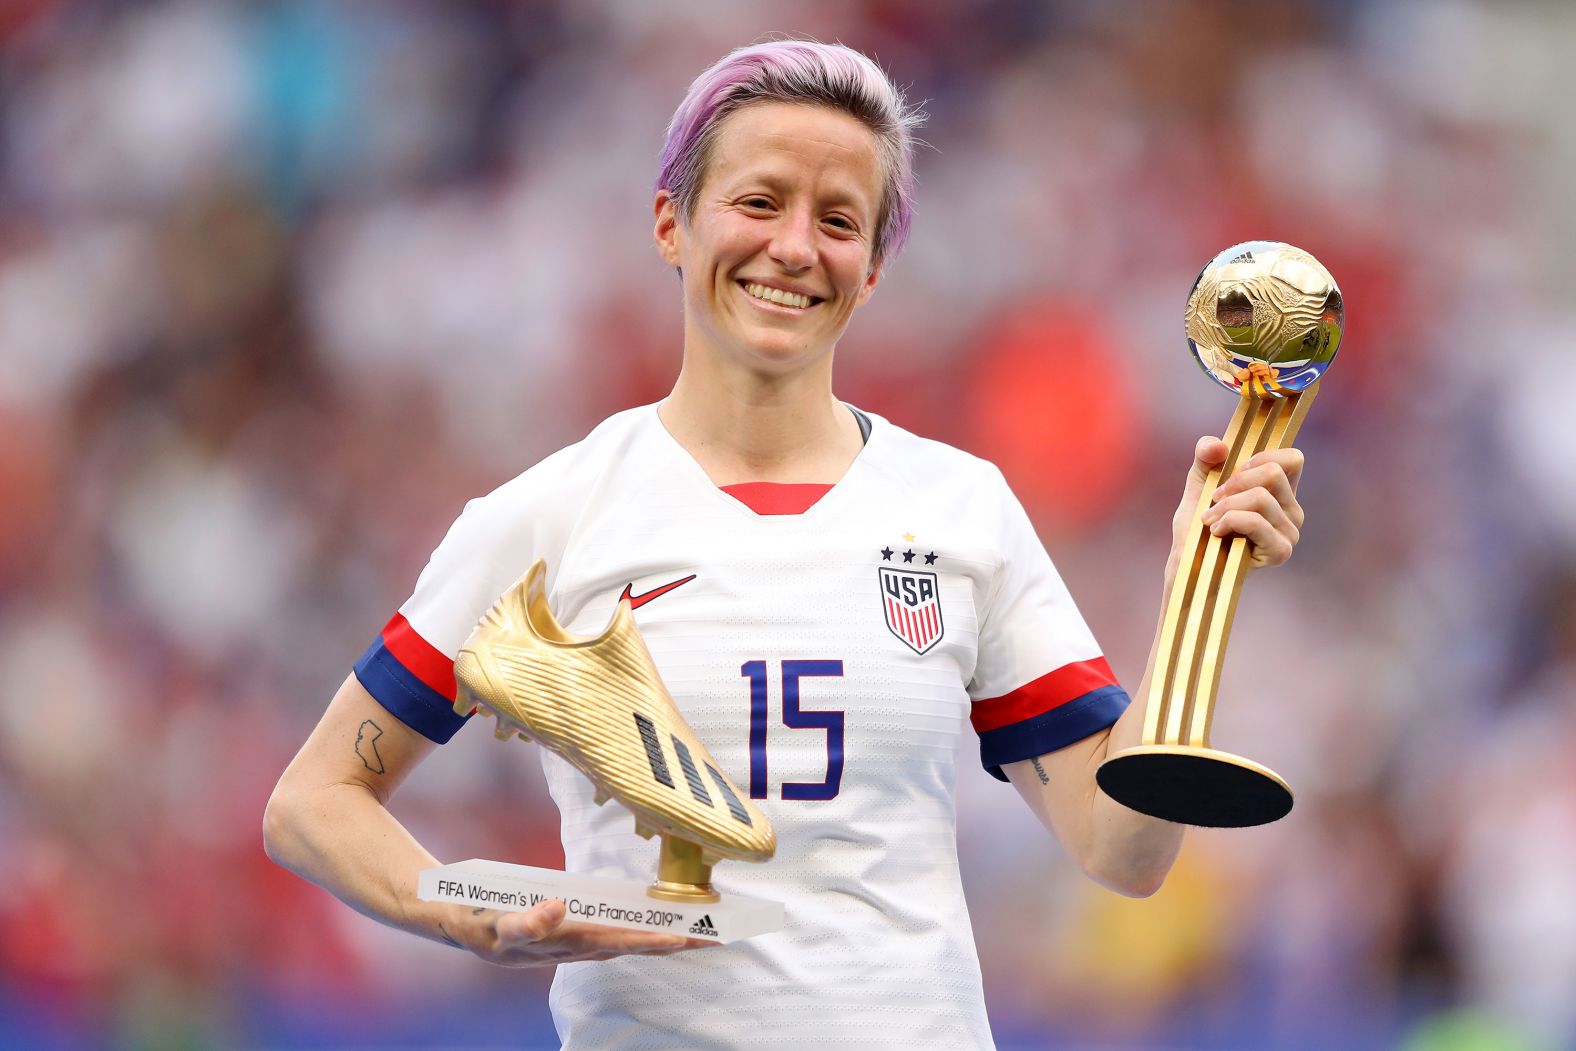 Rapinoe poses with the Golden Boot and Golden Ball awards at the 2019 World Cup. The Golden Ball is awarded to the tournament's top player and the Golden Boot is given to the tournament's top scorer.